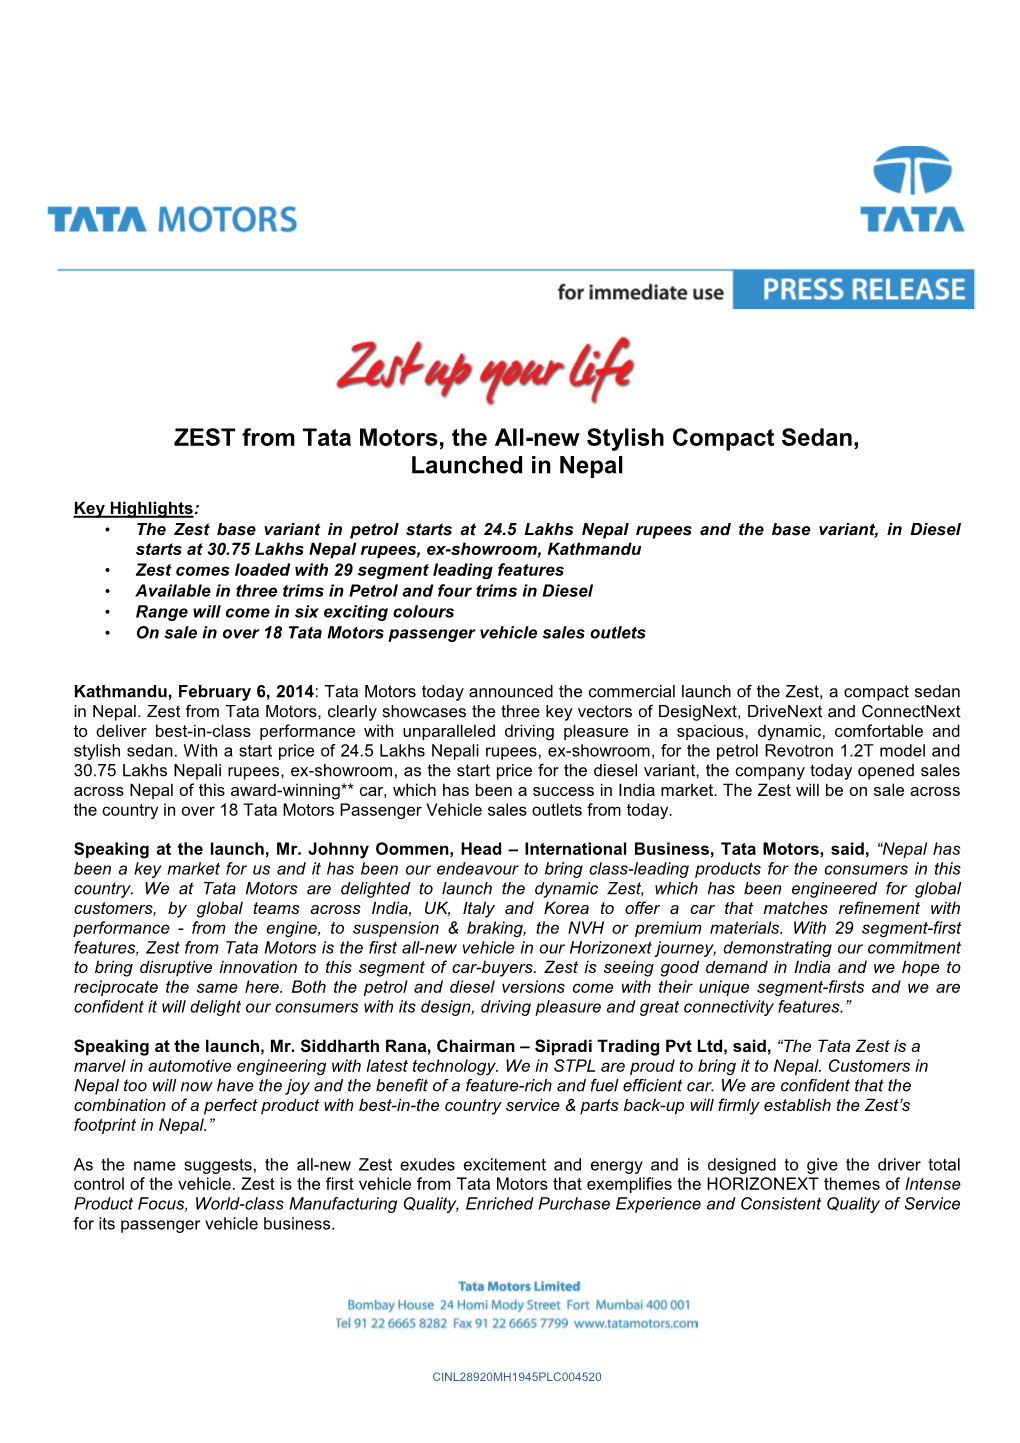 ZEST from Tata Motors, the All-New Stylish Compact Sedan, Launched in Nepal